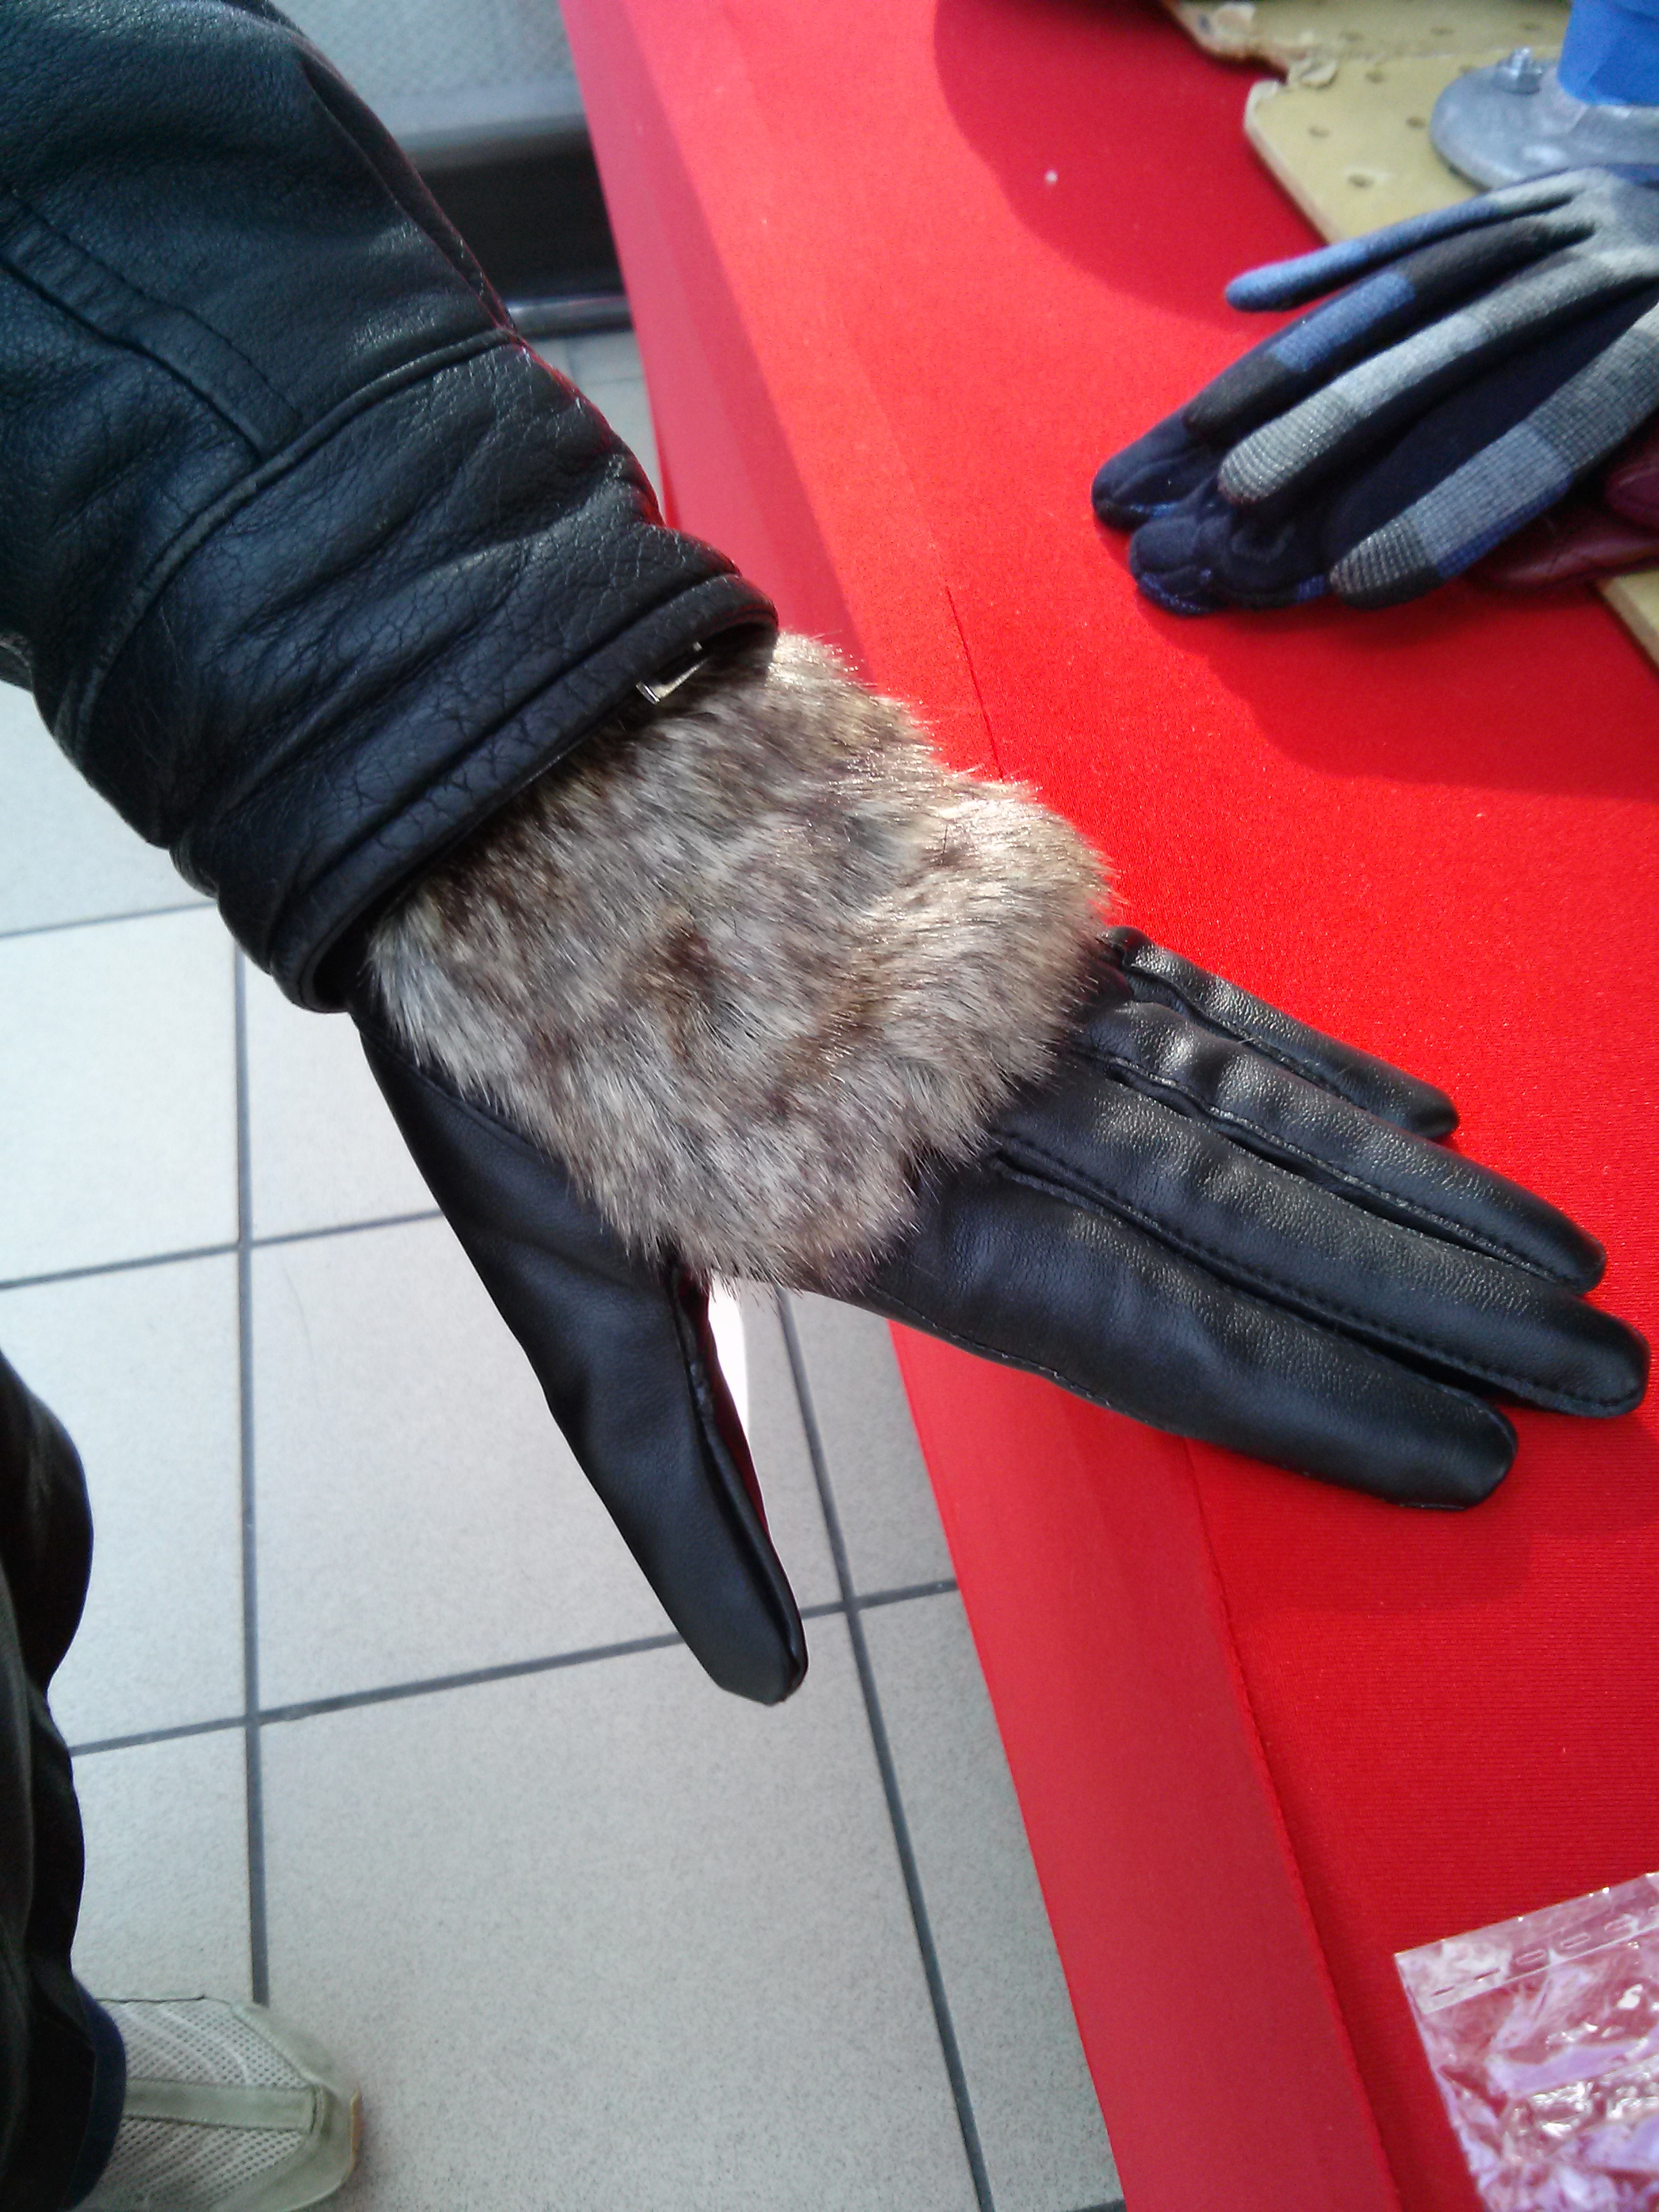 Customer tries on Leather Gloves with Faux Fur @ Airforce Base